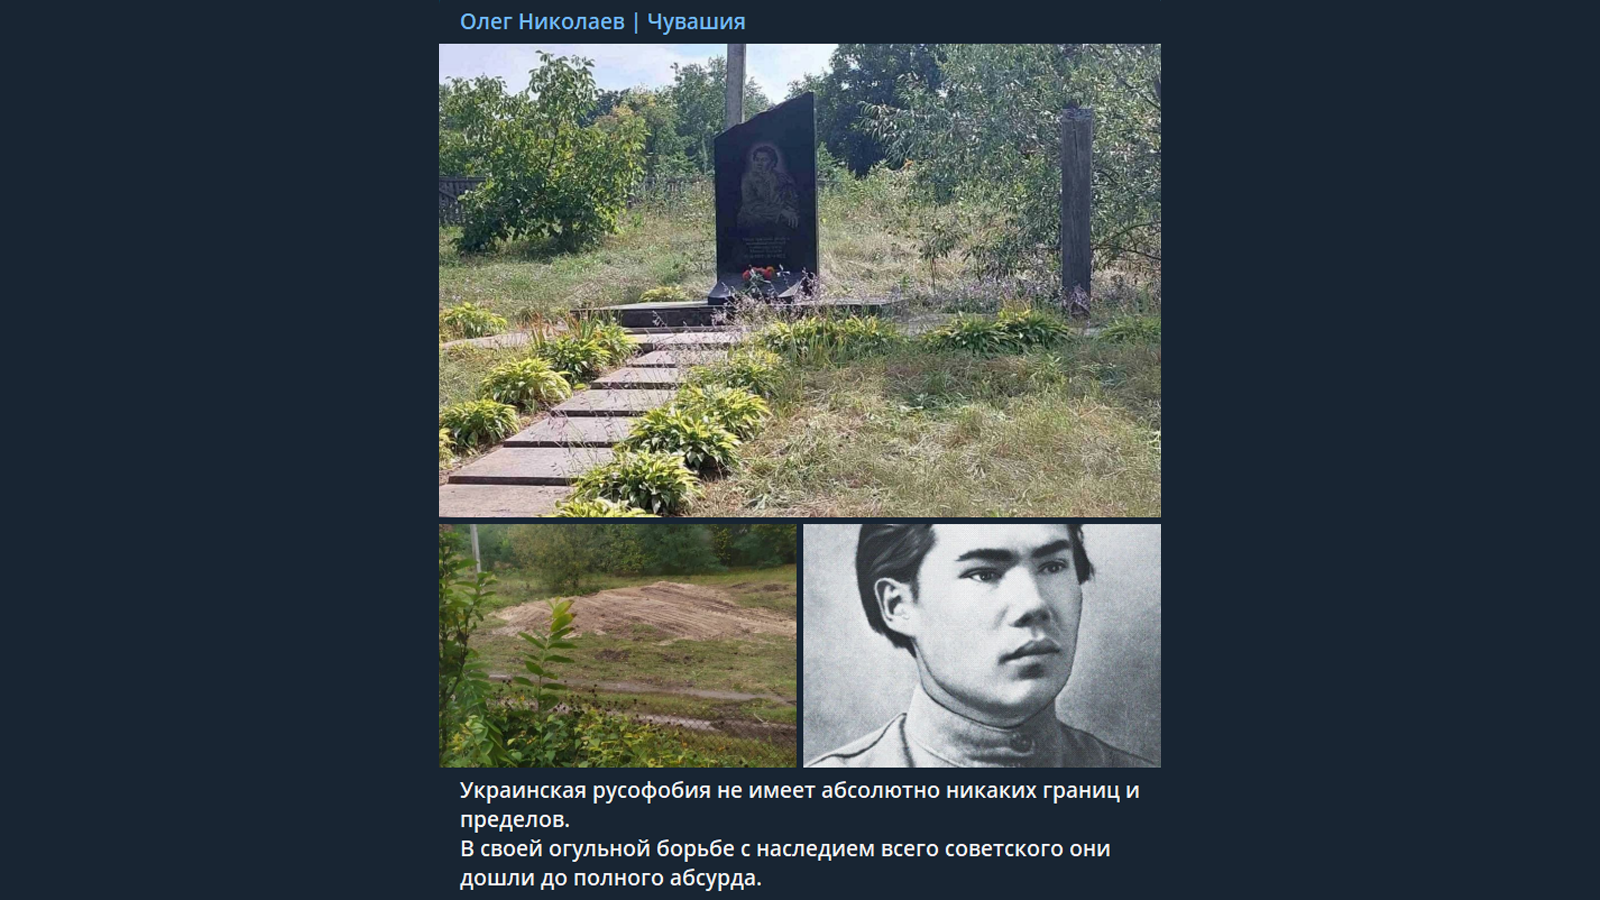 “Ukrainian russophobia has absolutely no boundaries and limits”: a monument to the Chuvash communist poet Mikhail Sespel was demolished in Chernihiv region, which agitated the occupation authorities in Chuvashia